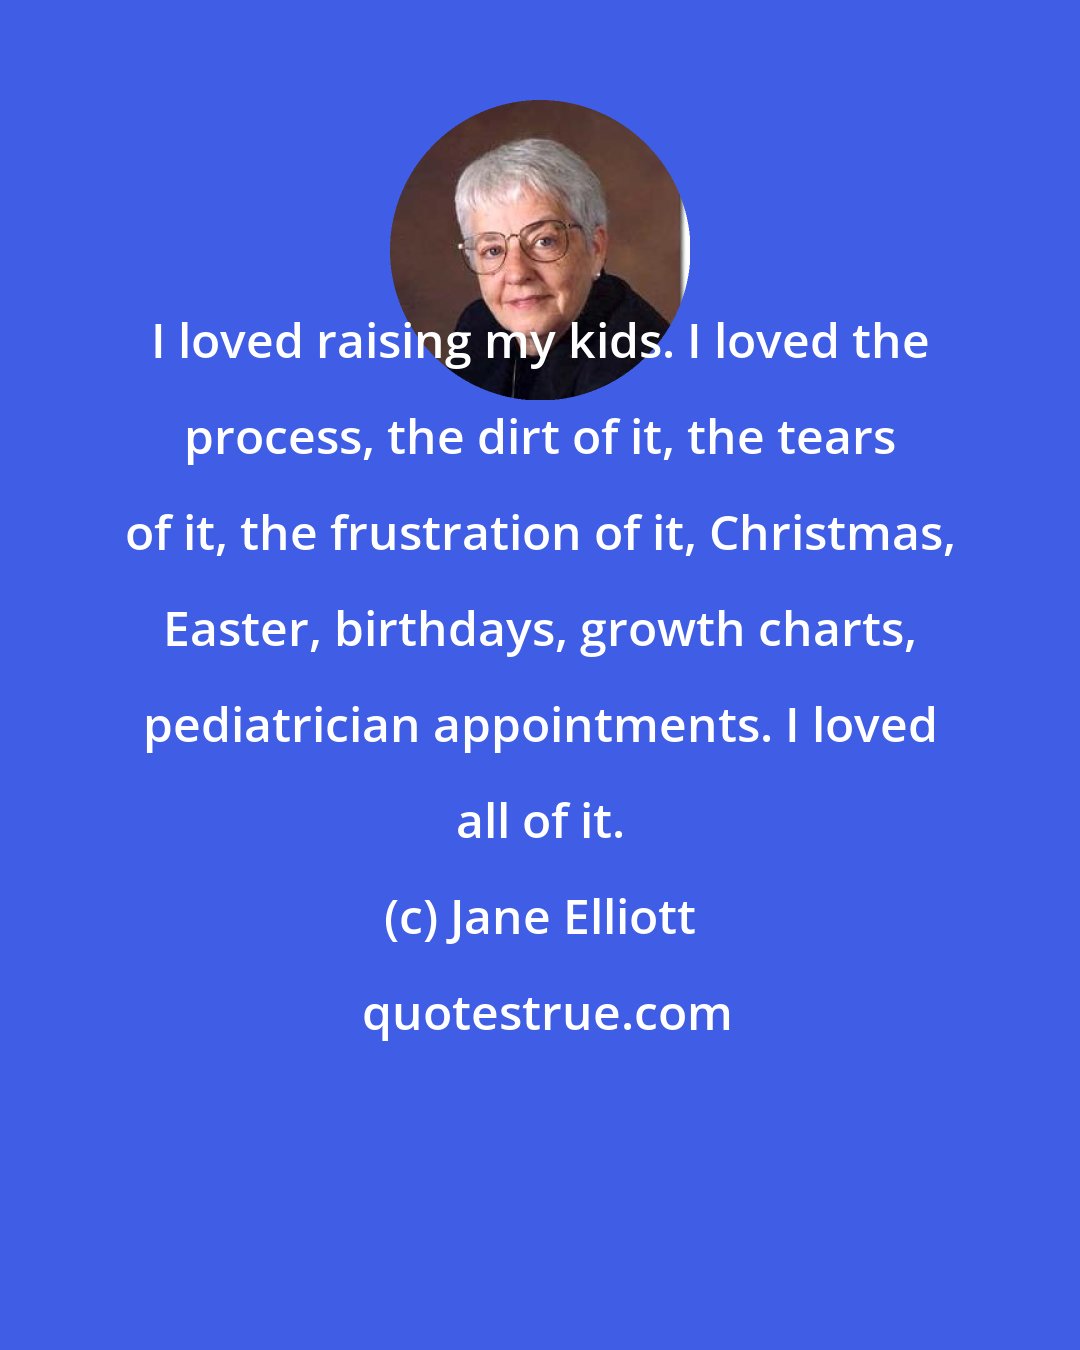 Jane Elliott: I loved raising my kids. I loved the process, the dirt of it, the tears of it, the frustration of it, Christmas, Easter, birthdays, growth charts, pediatrician appointments. I loved all of it.